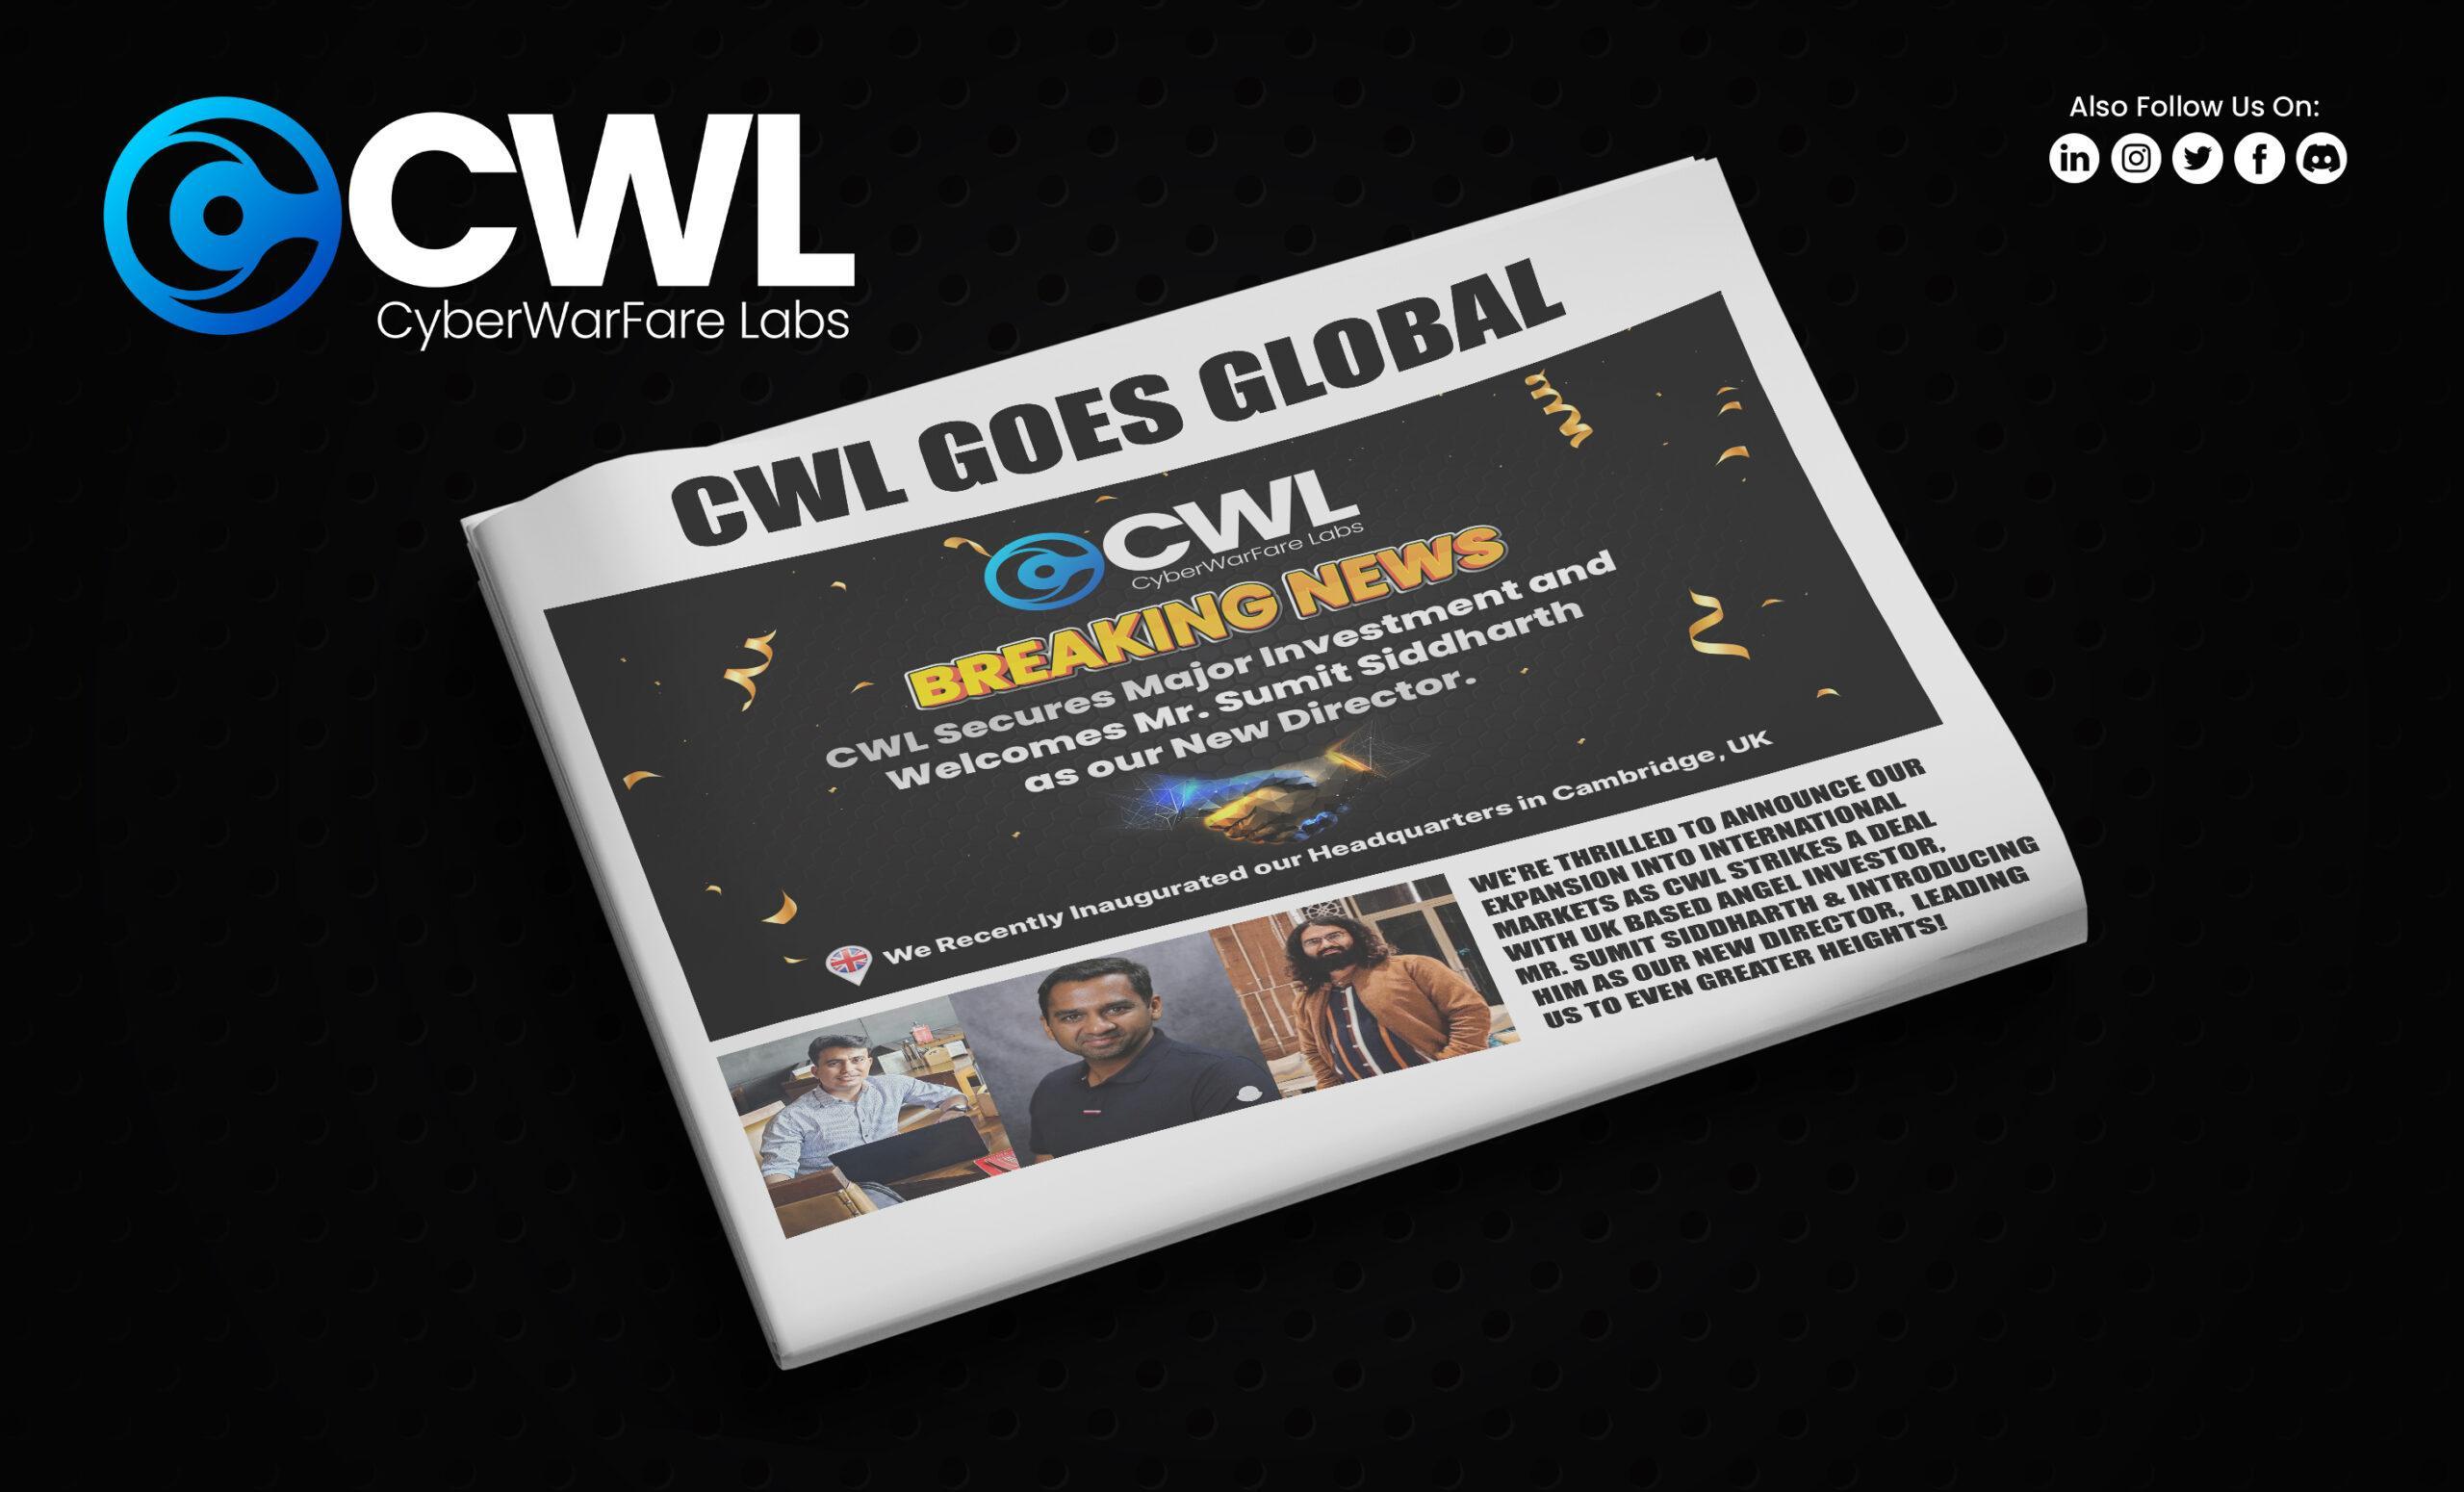 CWL Secures Huge Investment Deal and Appoints Sumit Siddharth as Director